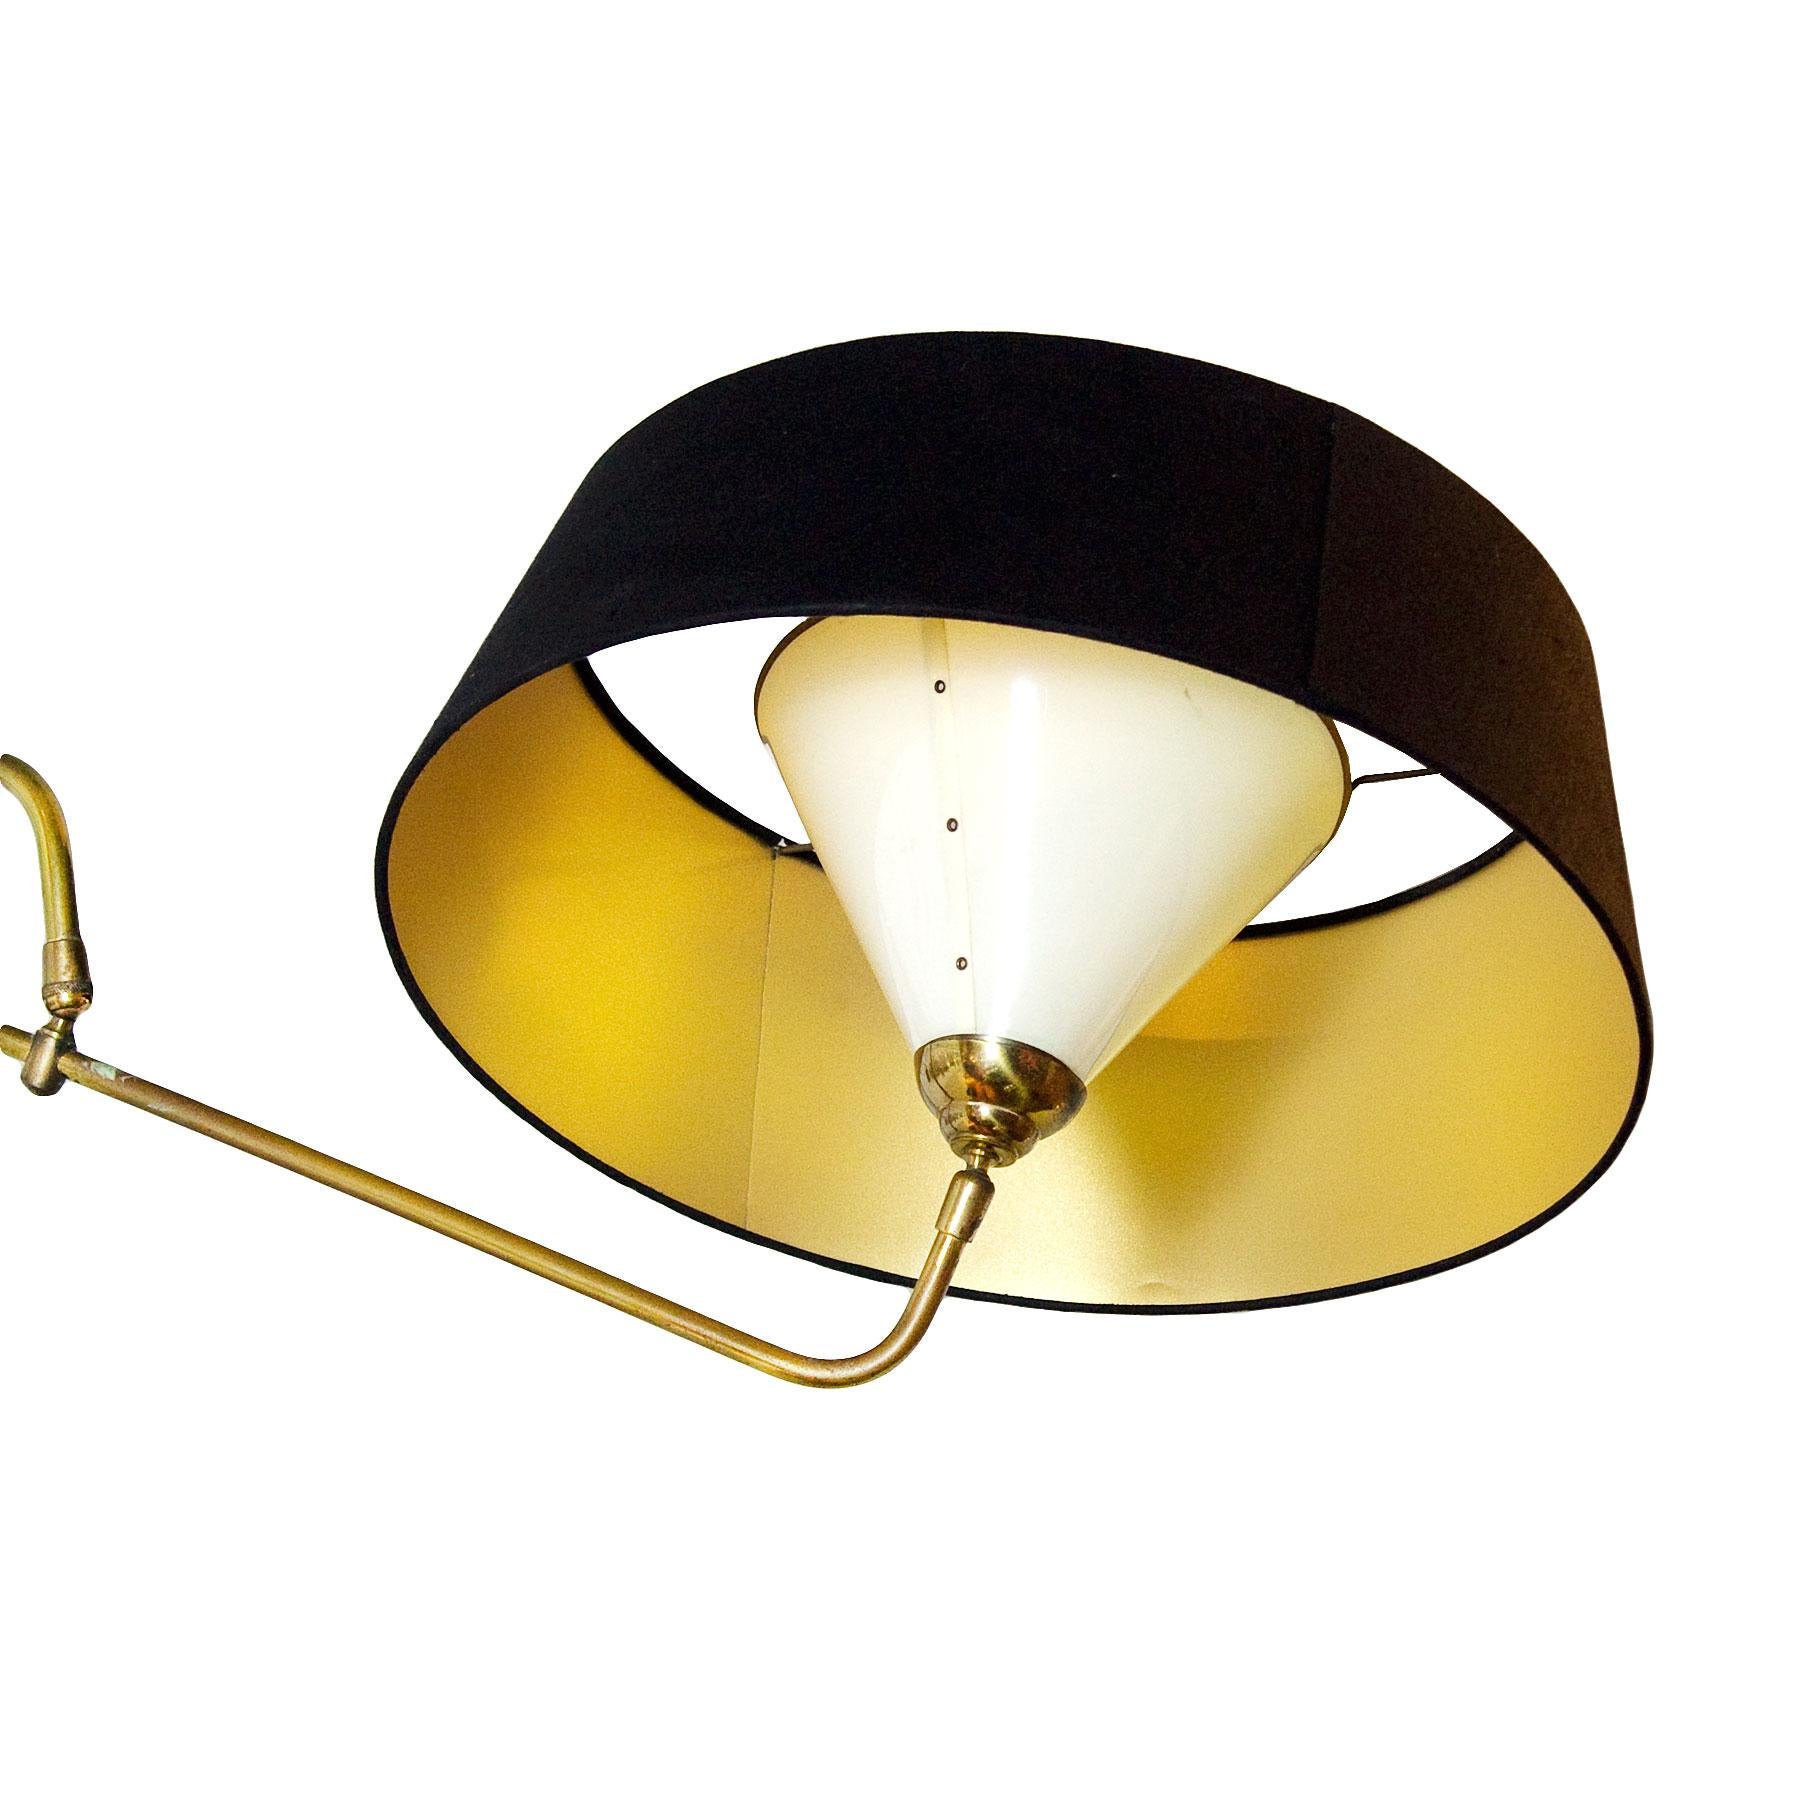 Mid-20th Century Big Mid-Century Modern Wall Light by Maison Lunel, Brass, Steel, Perspex -France For Sale